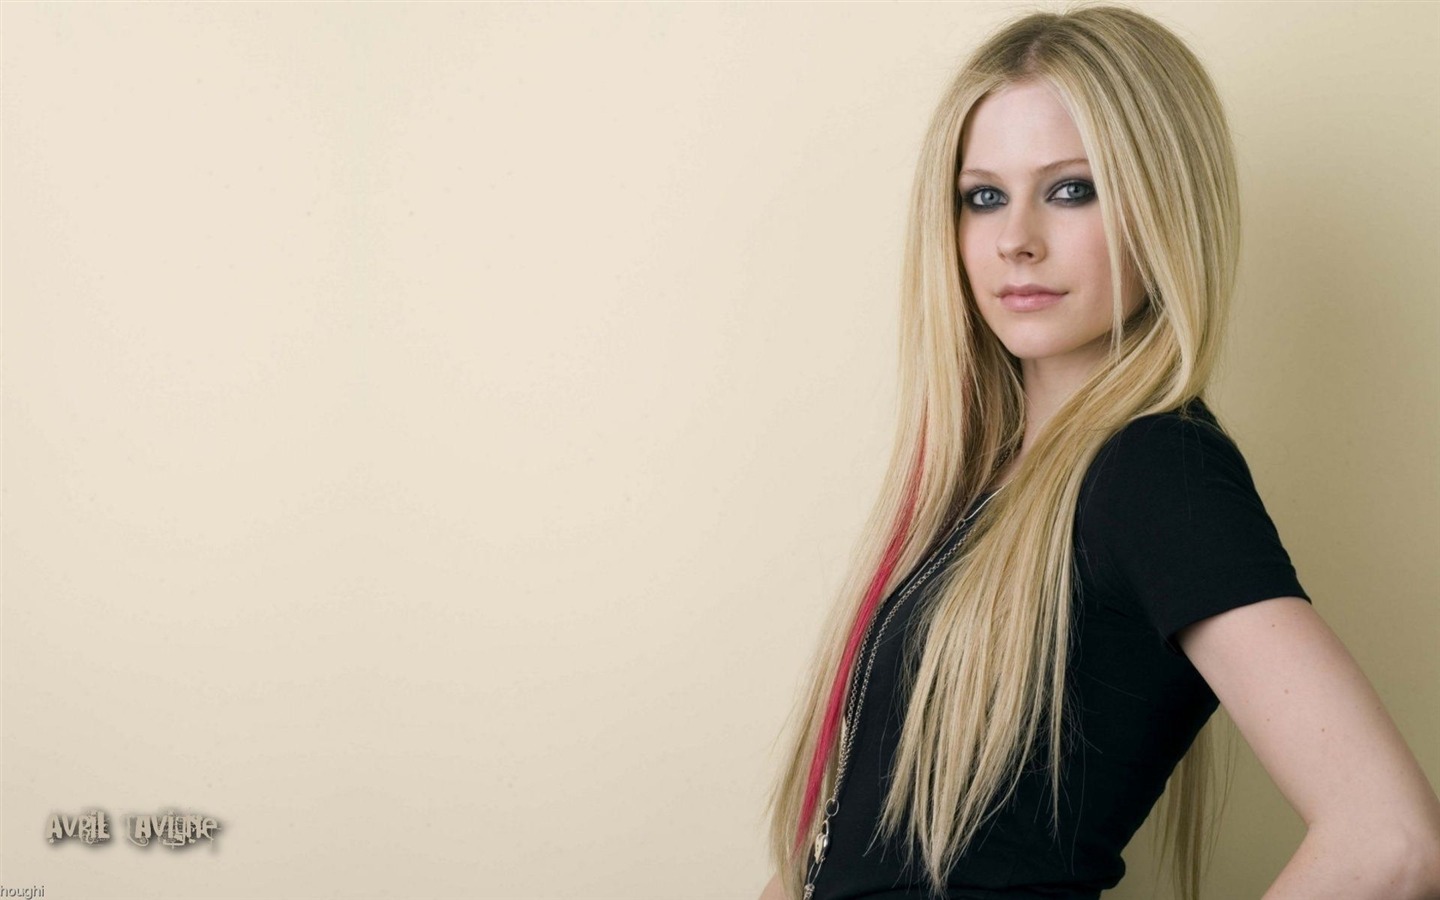 Avril Lavigne #069 - 1440x900 Wallpapers Pictures Photos Images